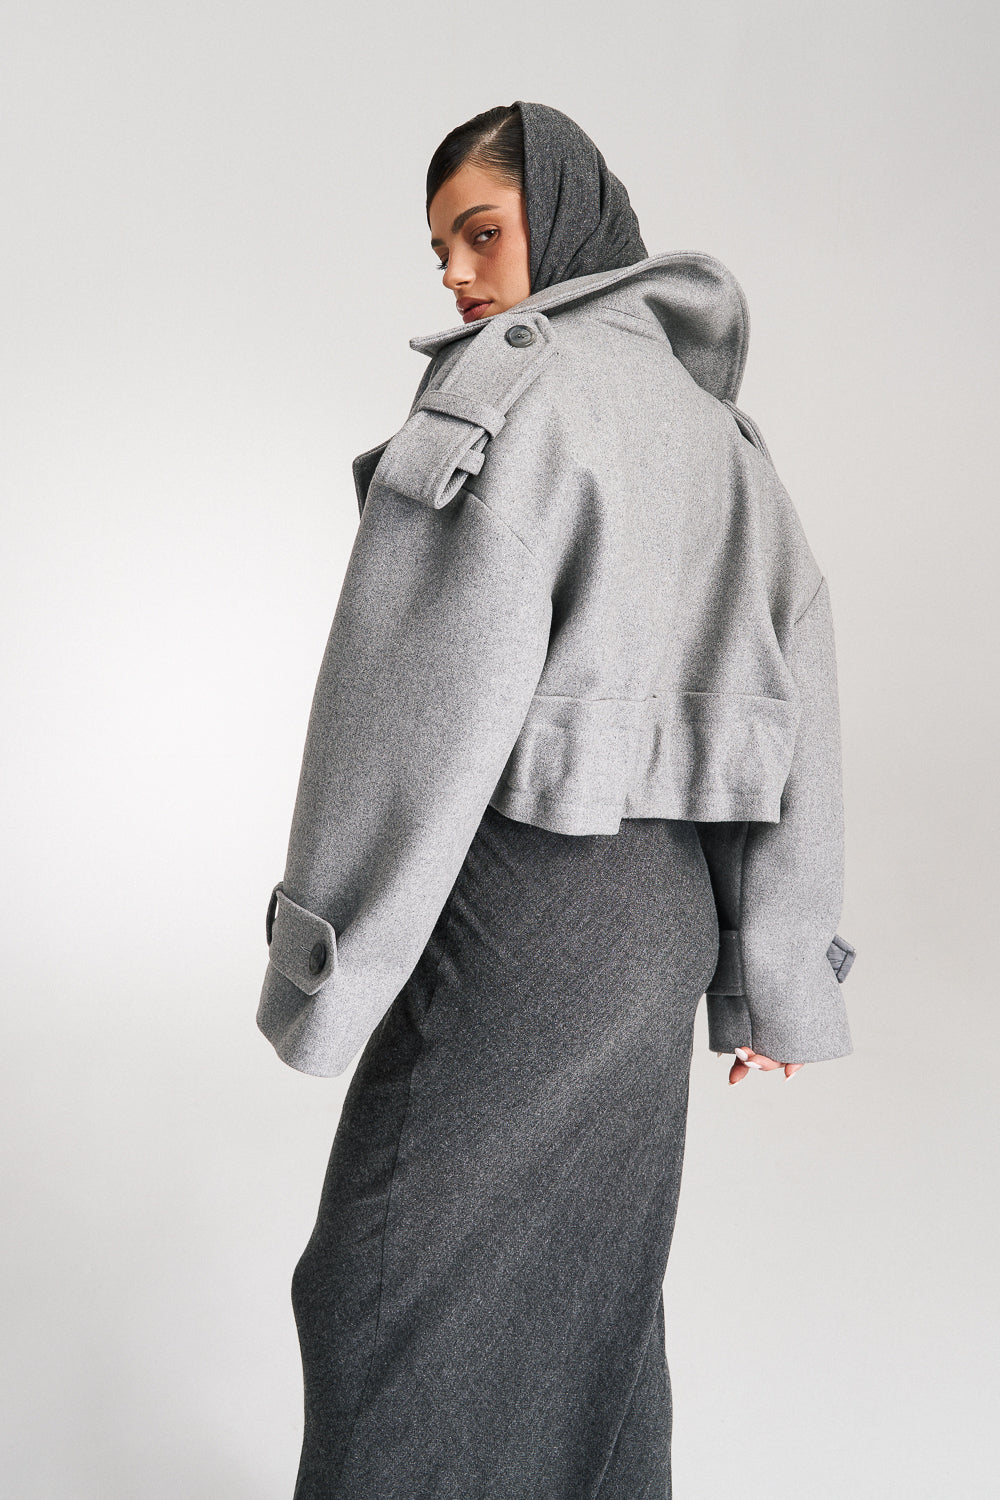 'Rae' Cropped Grey Double-Breasted Wool Coat